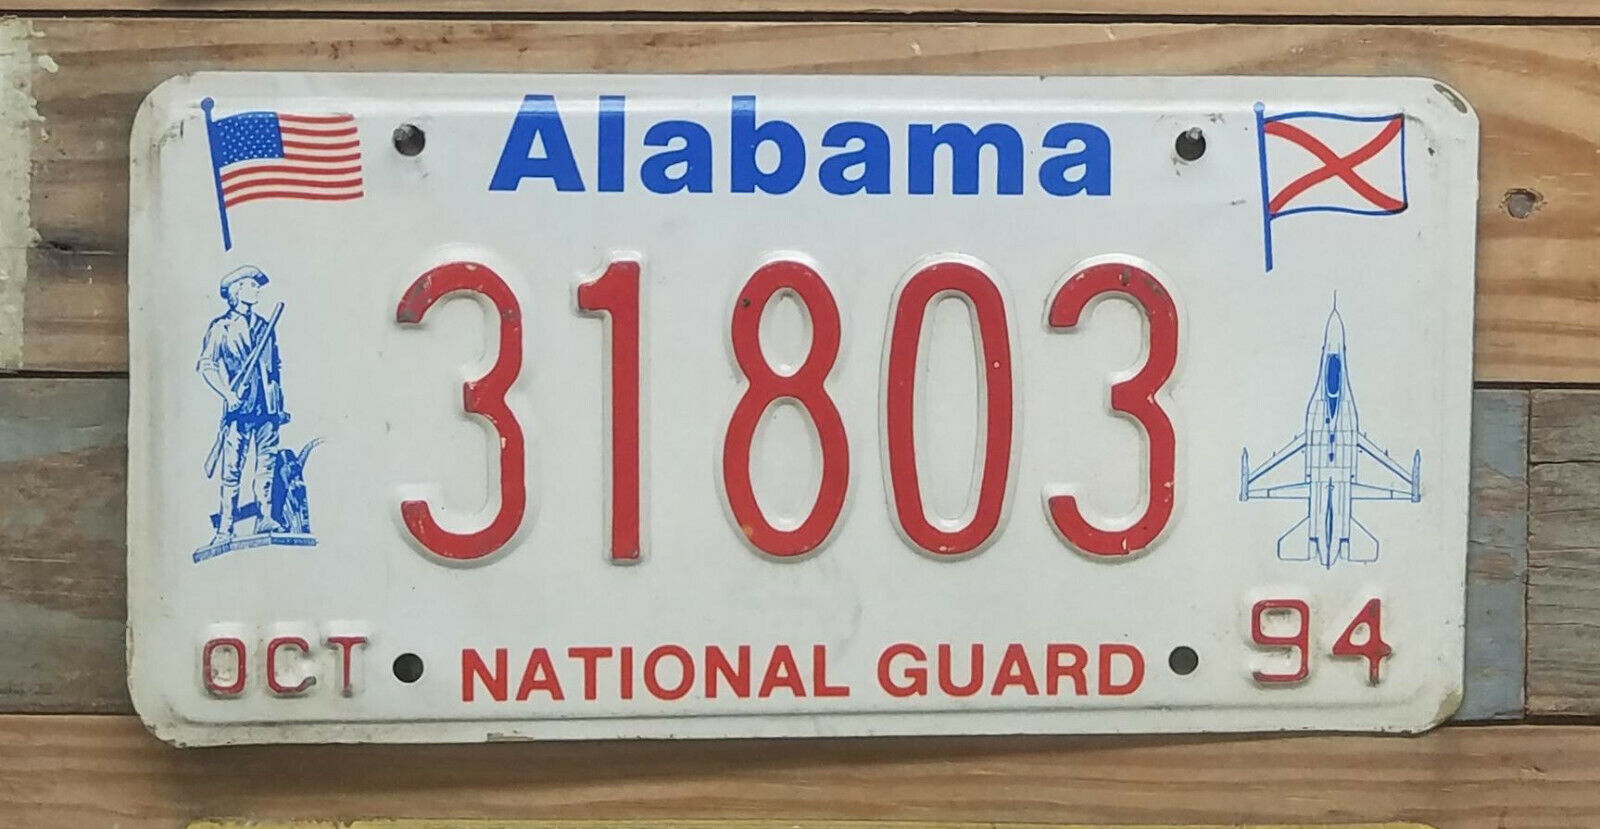  Alabama October expired 1994 National Guard License Plate/Tag - 31803